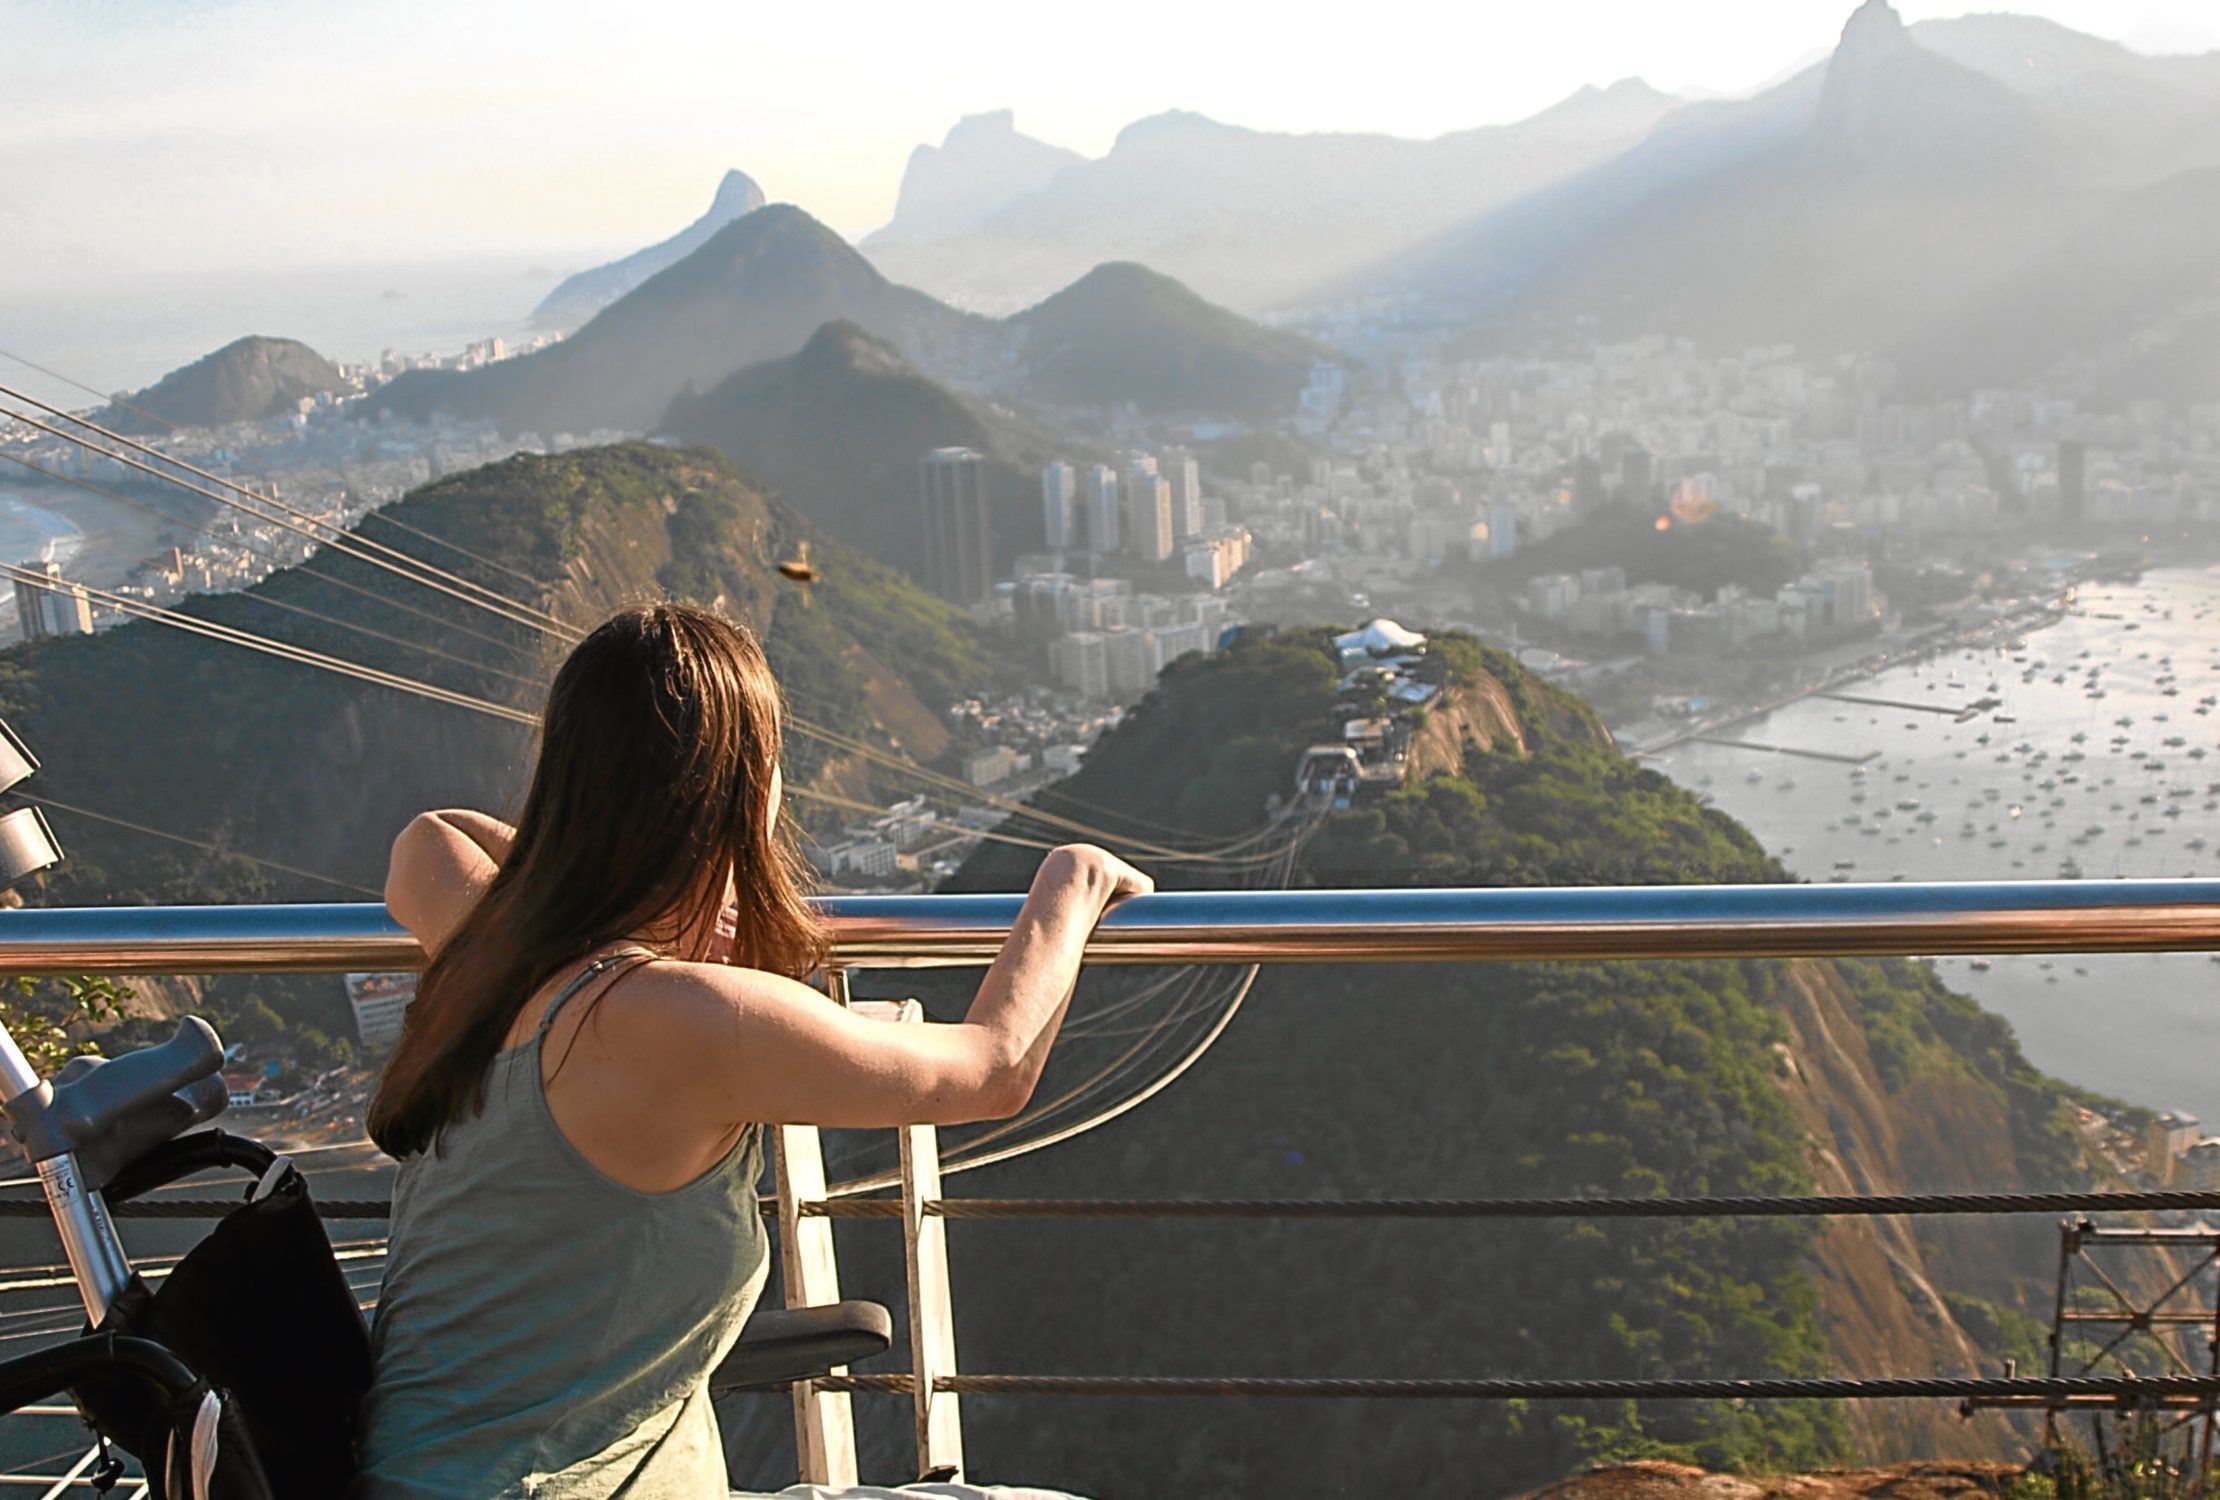 Susie loved to travel before her diagnosis, and still does, visiting places like Rio.